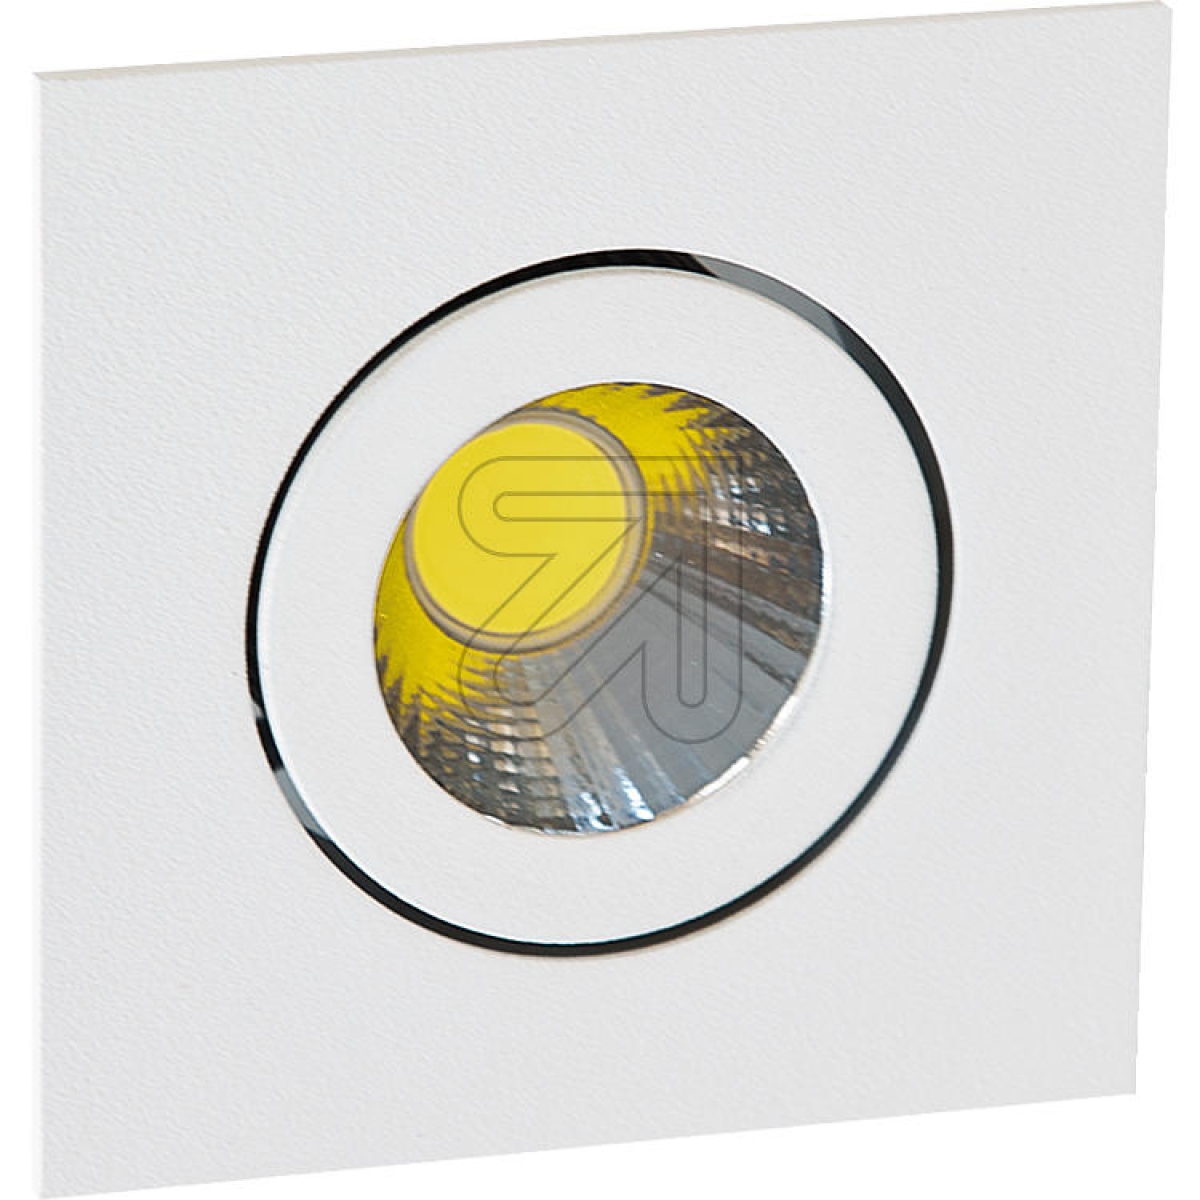 EVNLED recessed light white 4000K 8.4W PC24N90140Article-No: 624105